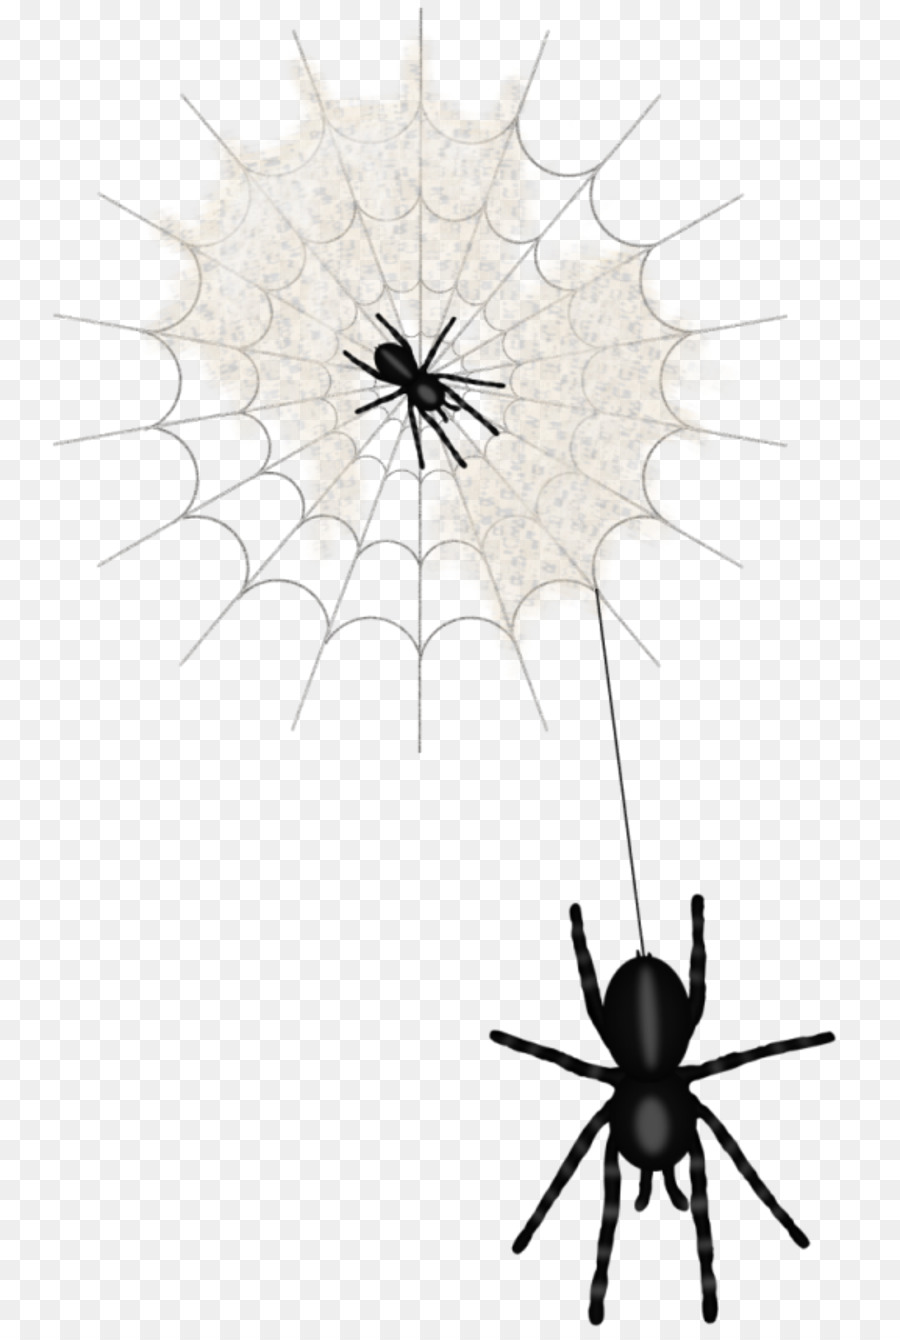 Widow spiders Clip art - spider web animation png download - 800*1334 - Free Transparent Widow Spiders png Download.